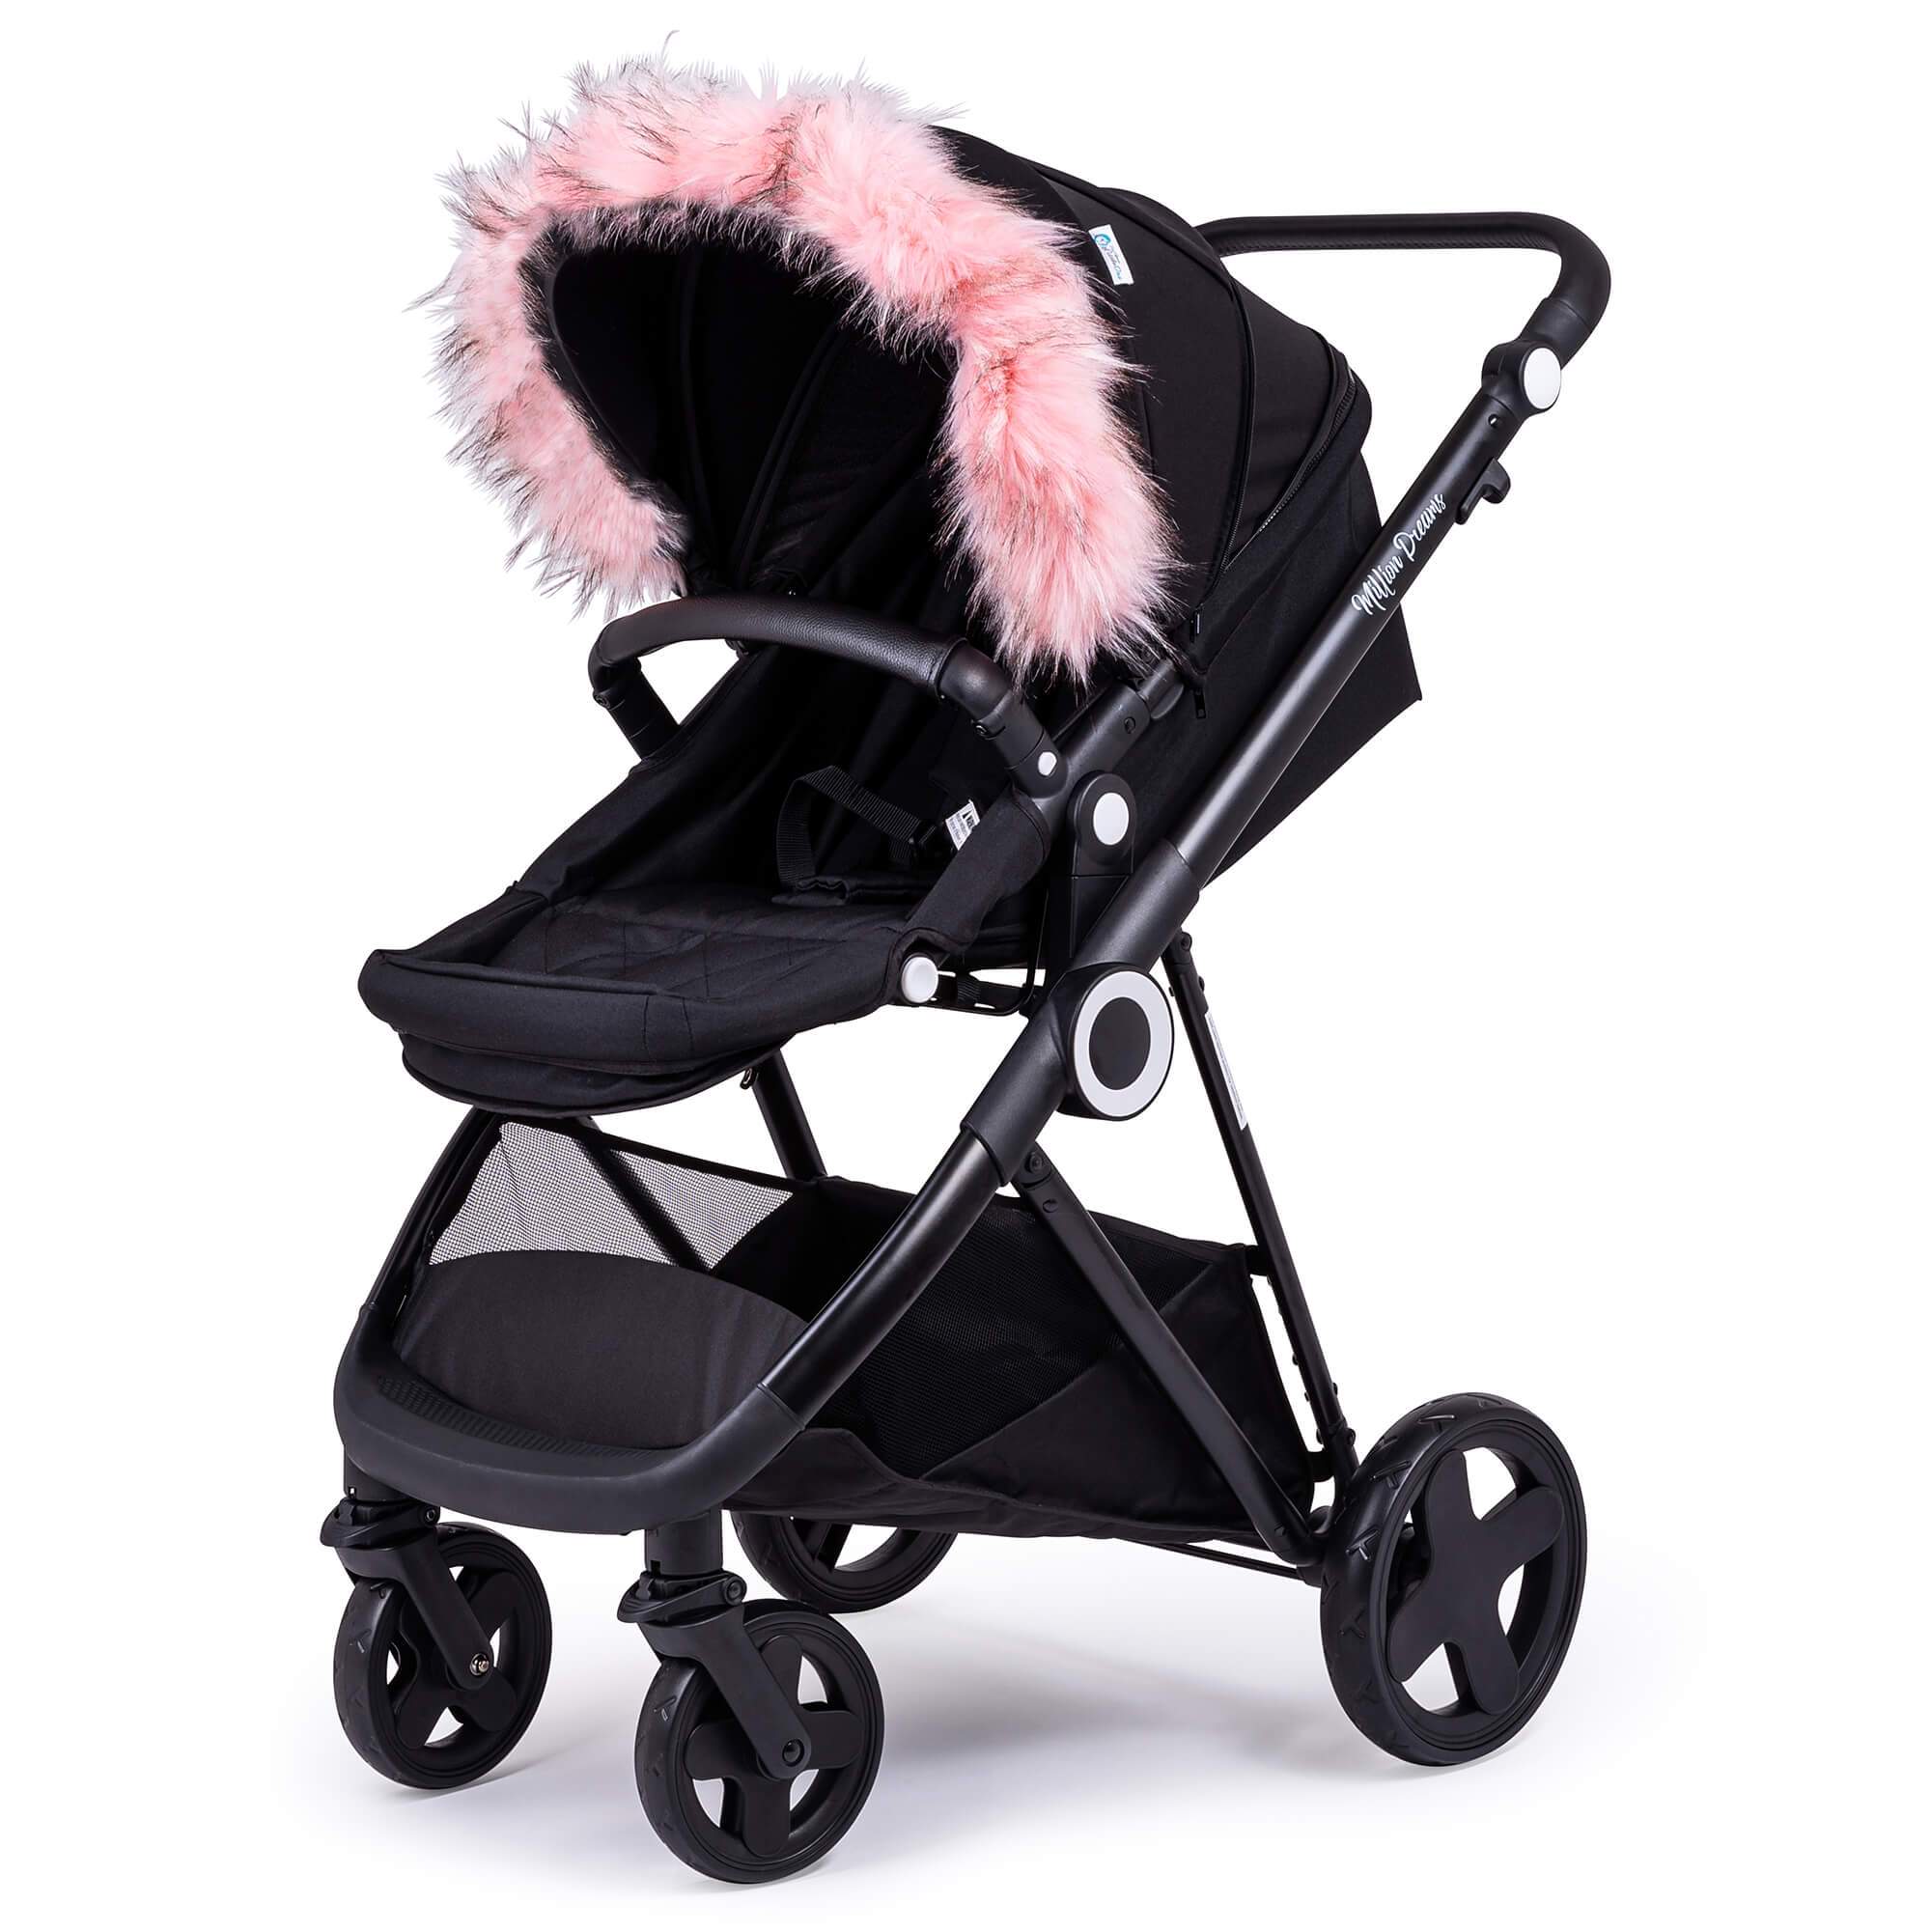 Pram Fur Hood Trim Attachment for Pushchair Compatible with Mothercare - Light Pink / Fits All Models | For Your Little One